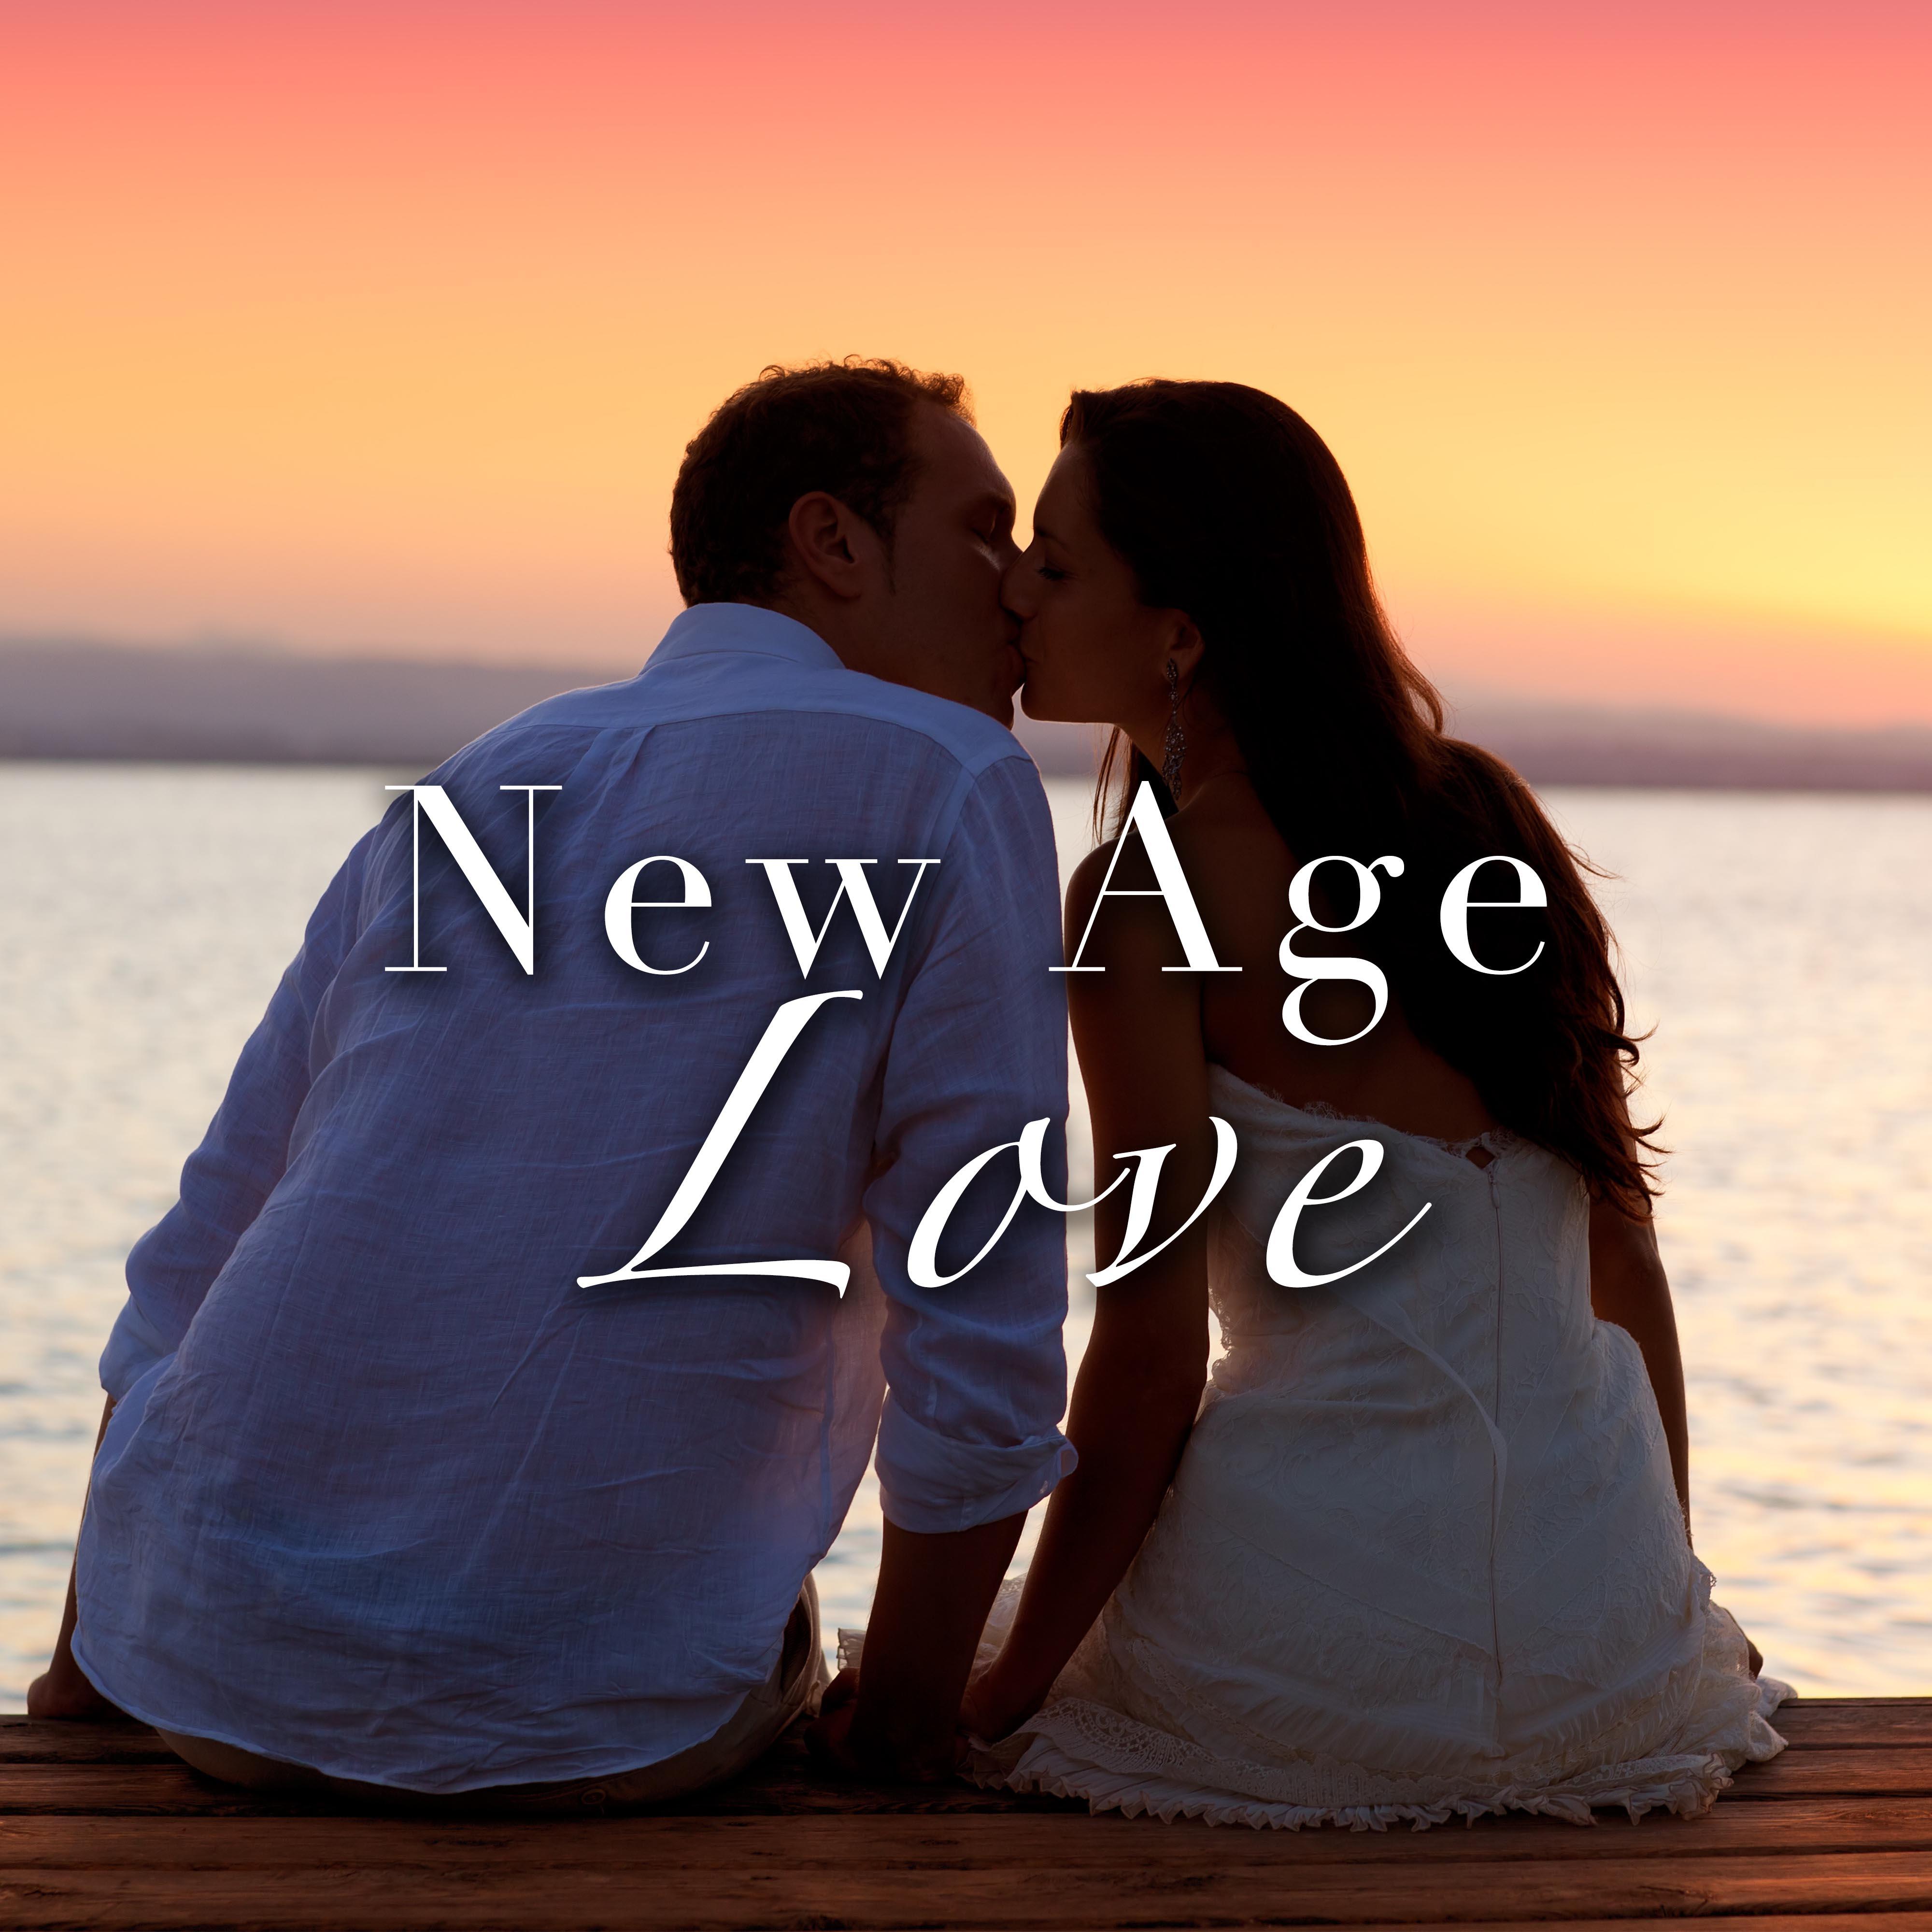 New Age Love - Piano Melodies with New Age Vibes for Romantic Nights